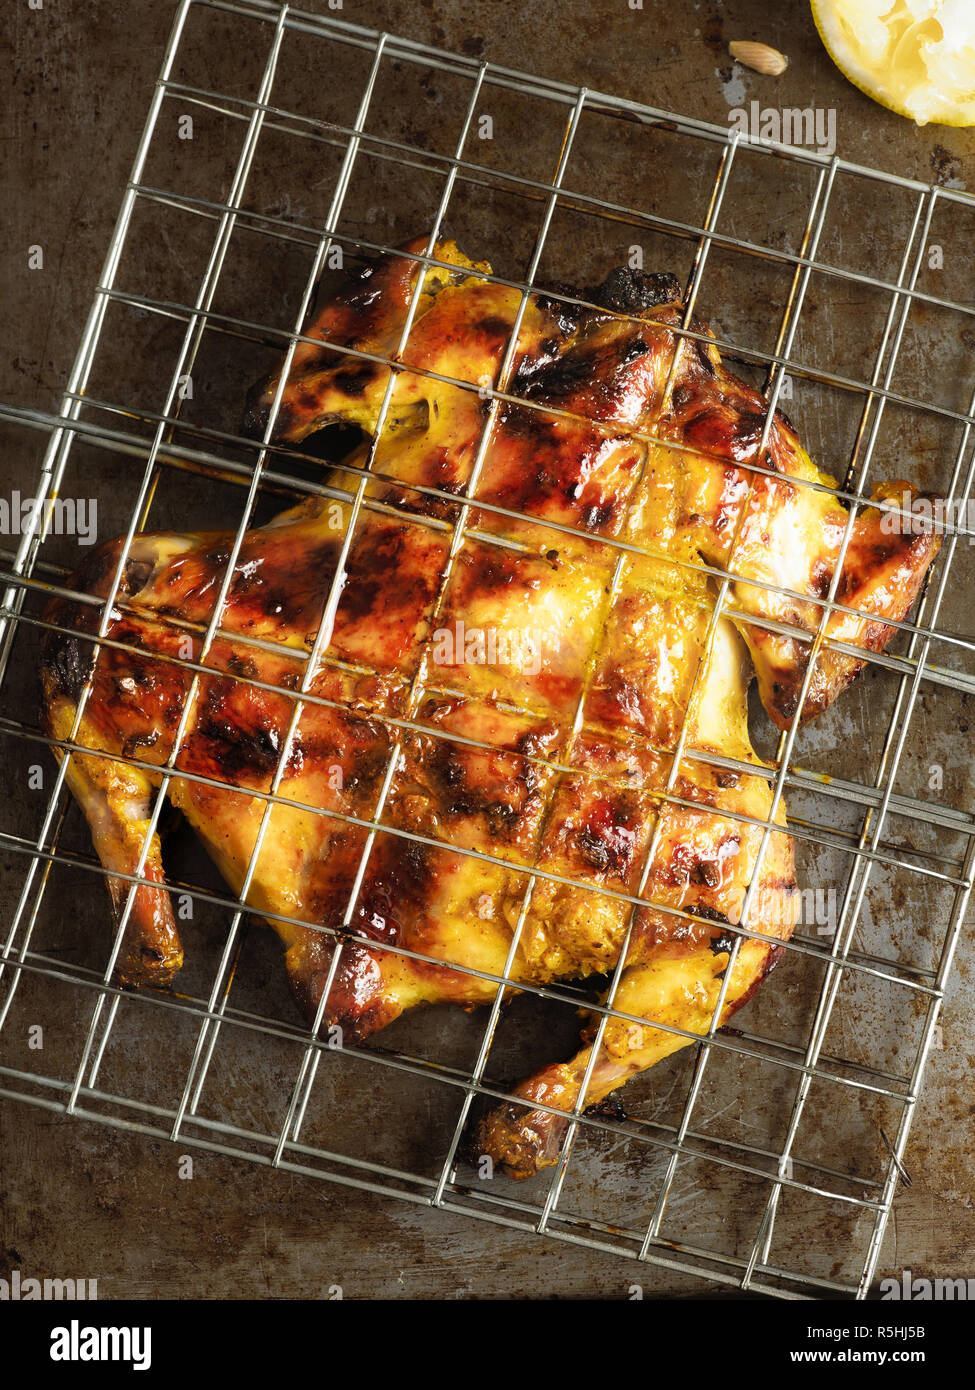 rustic barbecued whole chicken Stock Photo